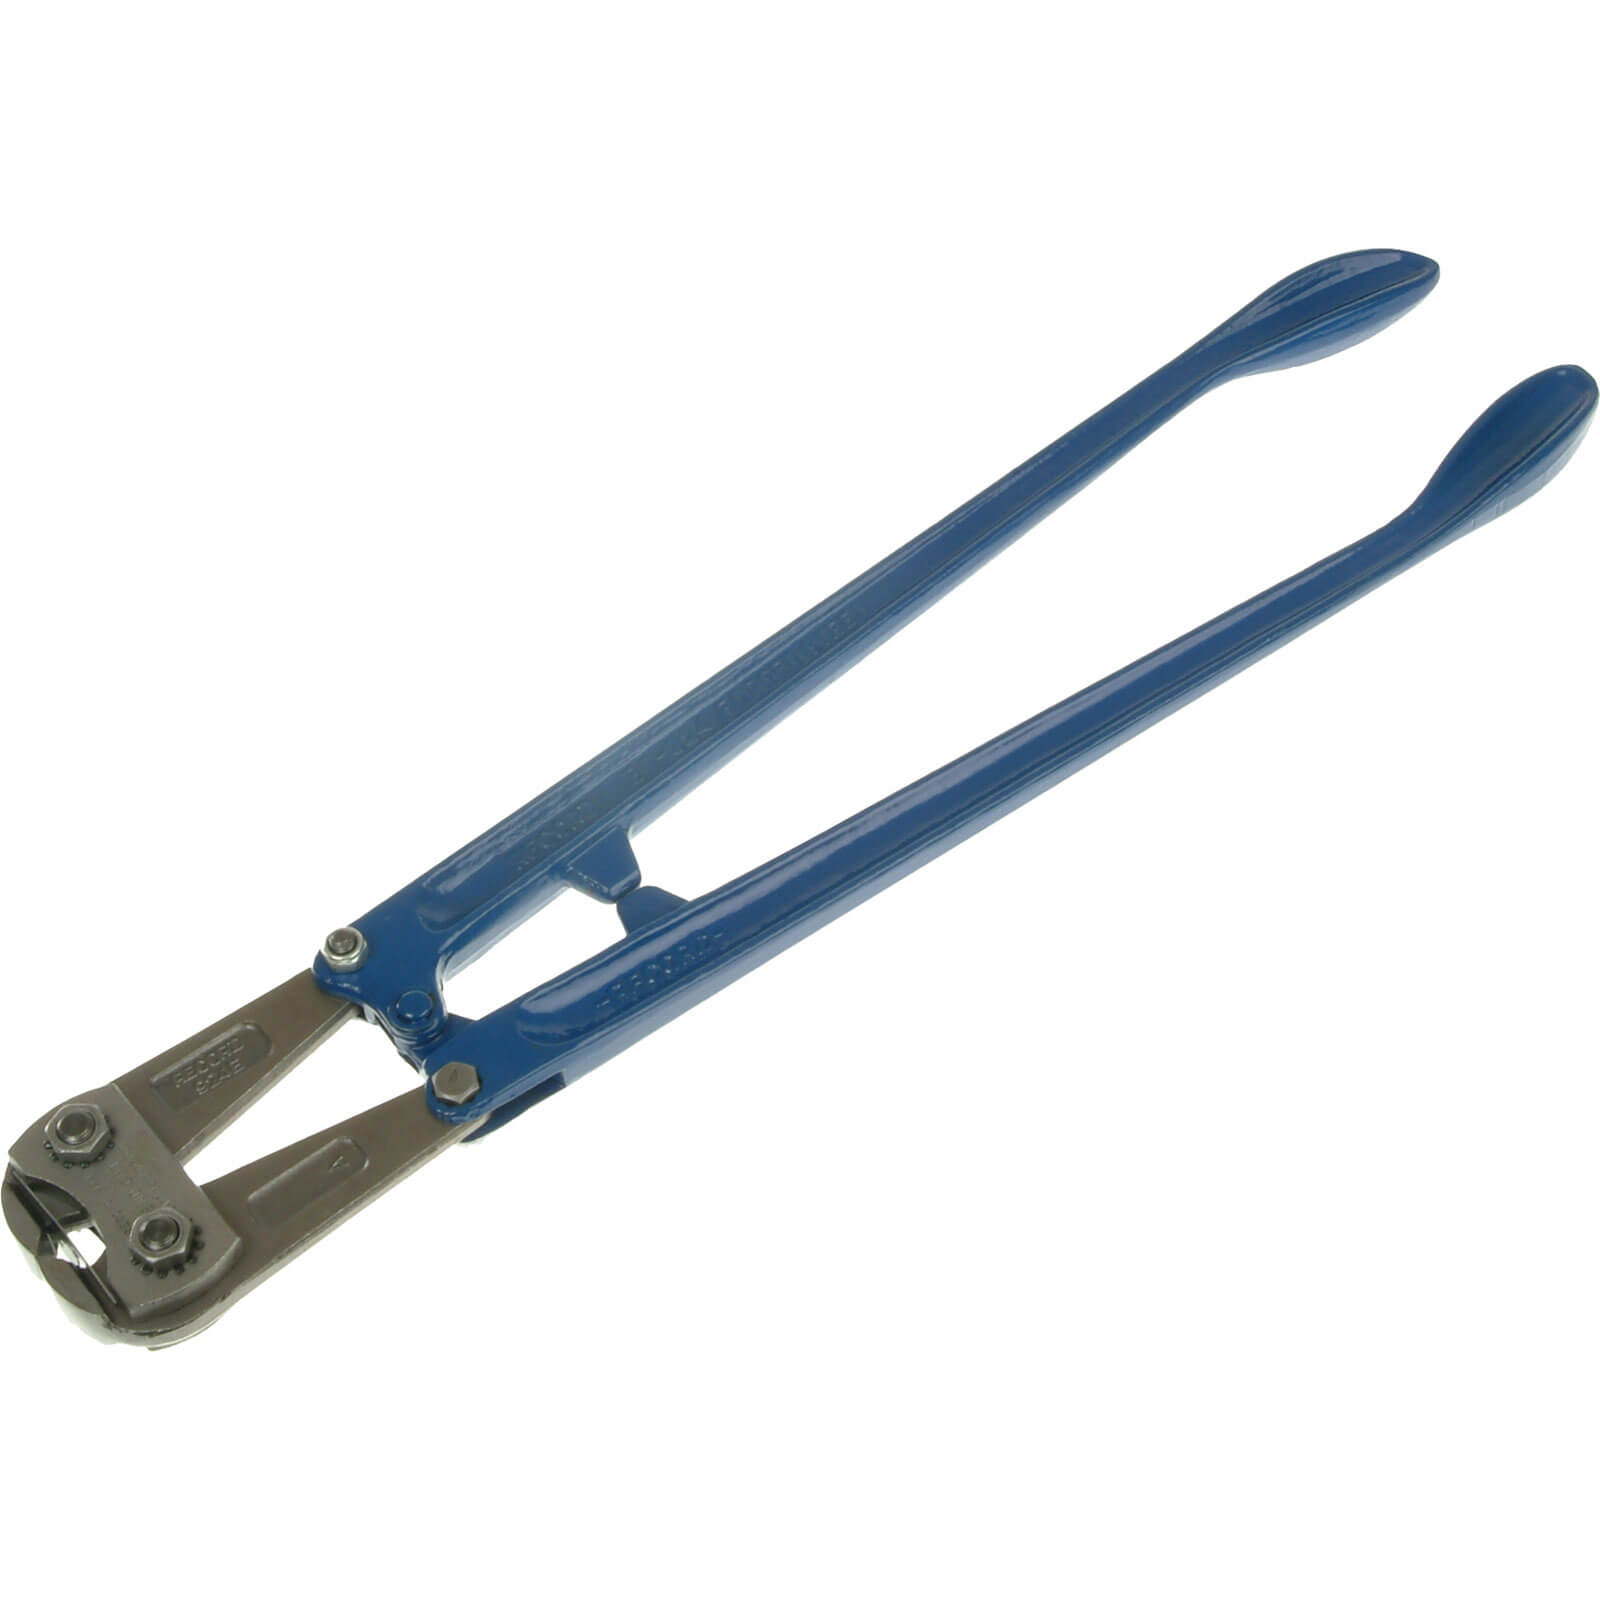 Photo of Record End Cut Bolt Cutter 600mm